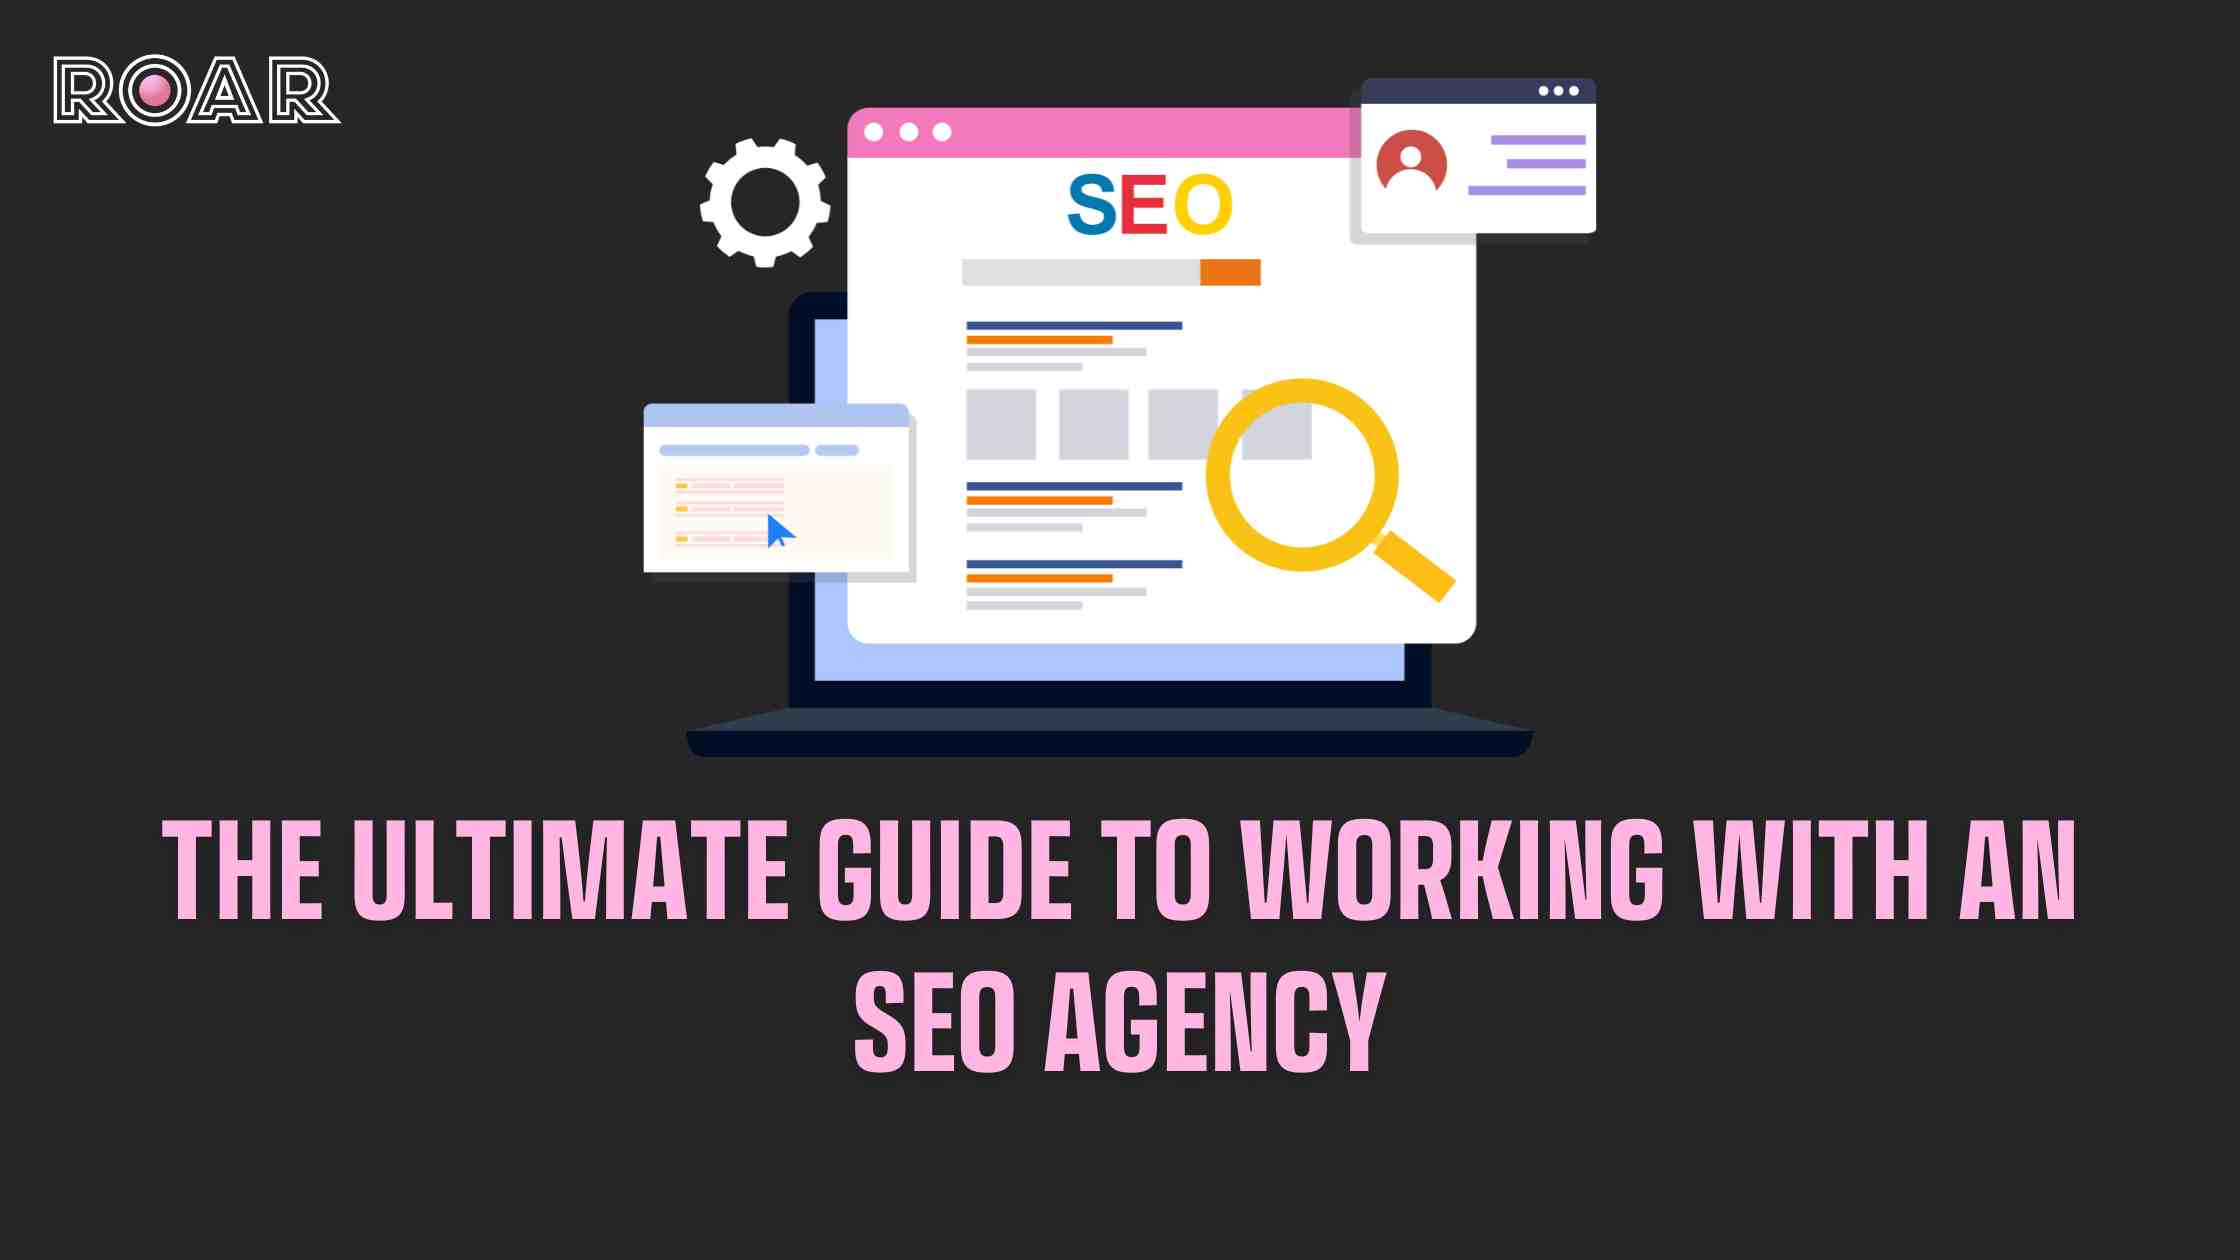 THE ULTIMATE GUIDE TO WORKING WITH AN SEO AGENCY